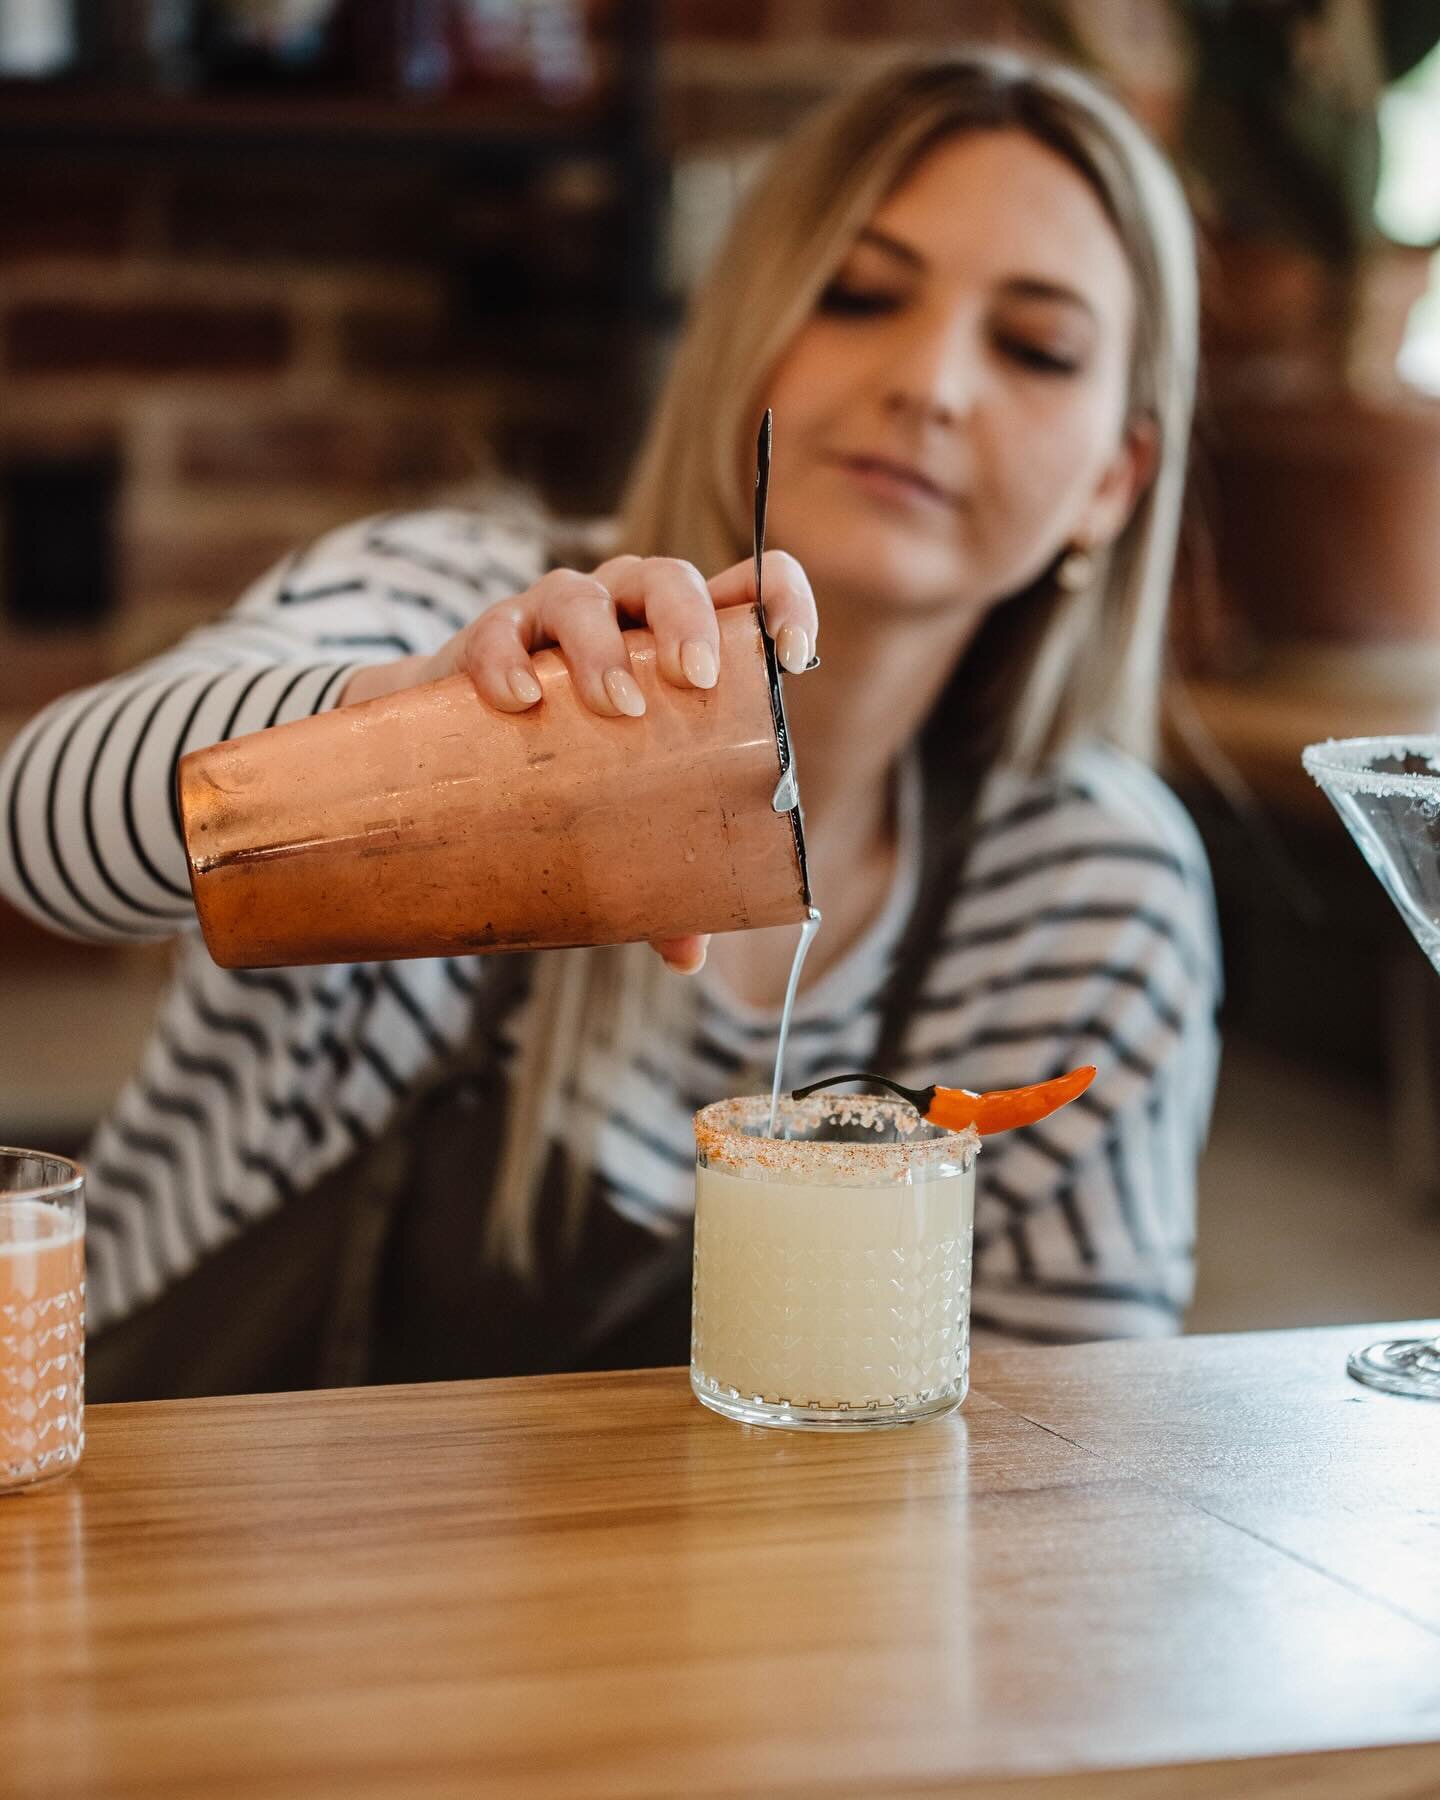 Sippin' on chill margaritas, the perfect Sunday pick-me-up. 🍹☀️ #SundayFunday #margaritatime